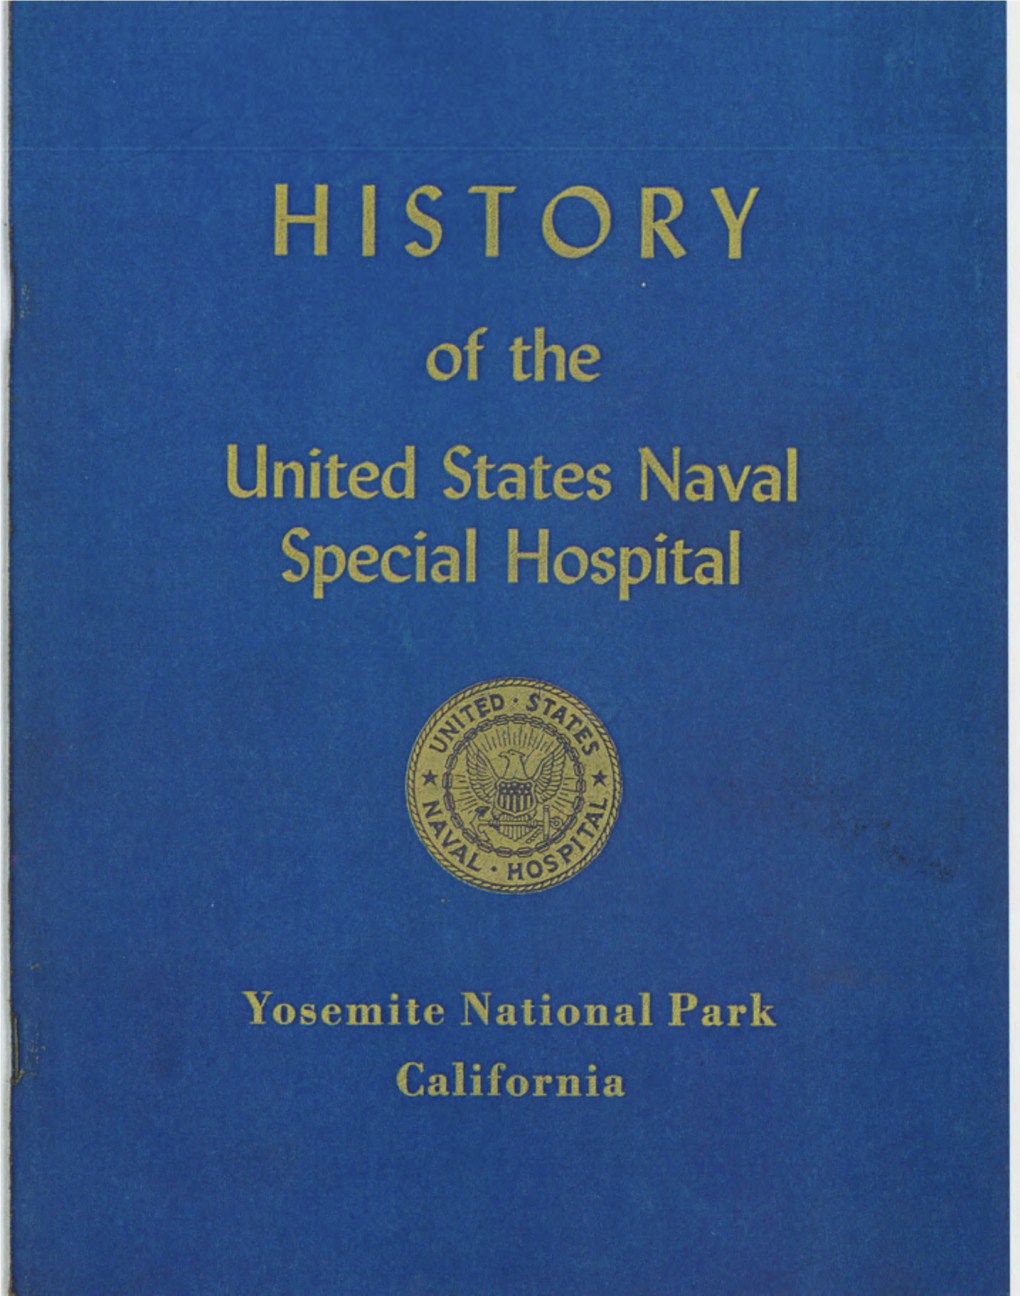 History of the United States Naval Special Hospital